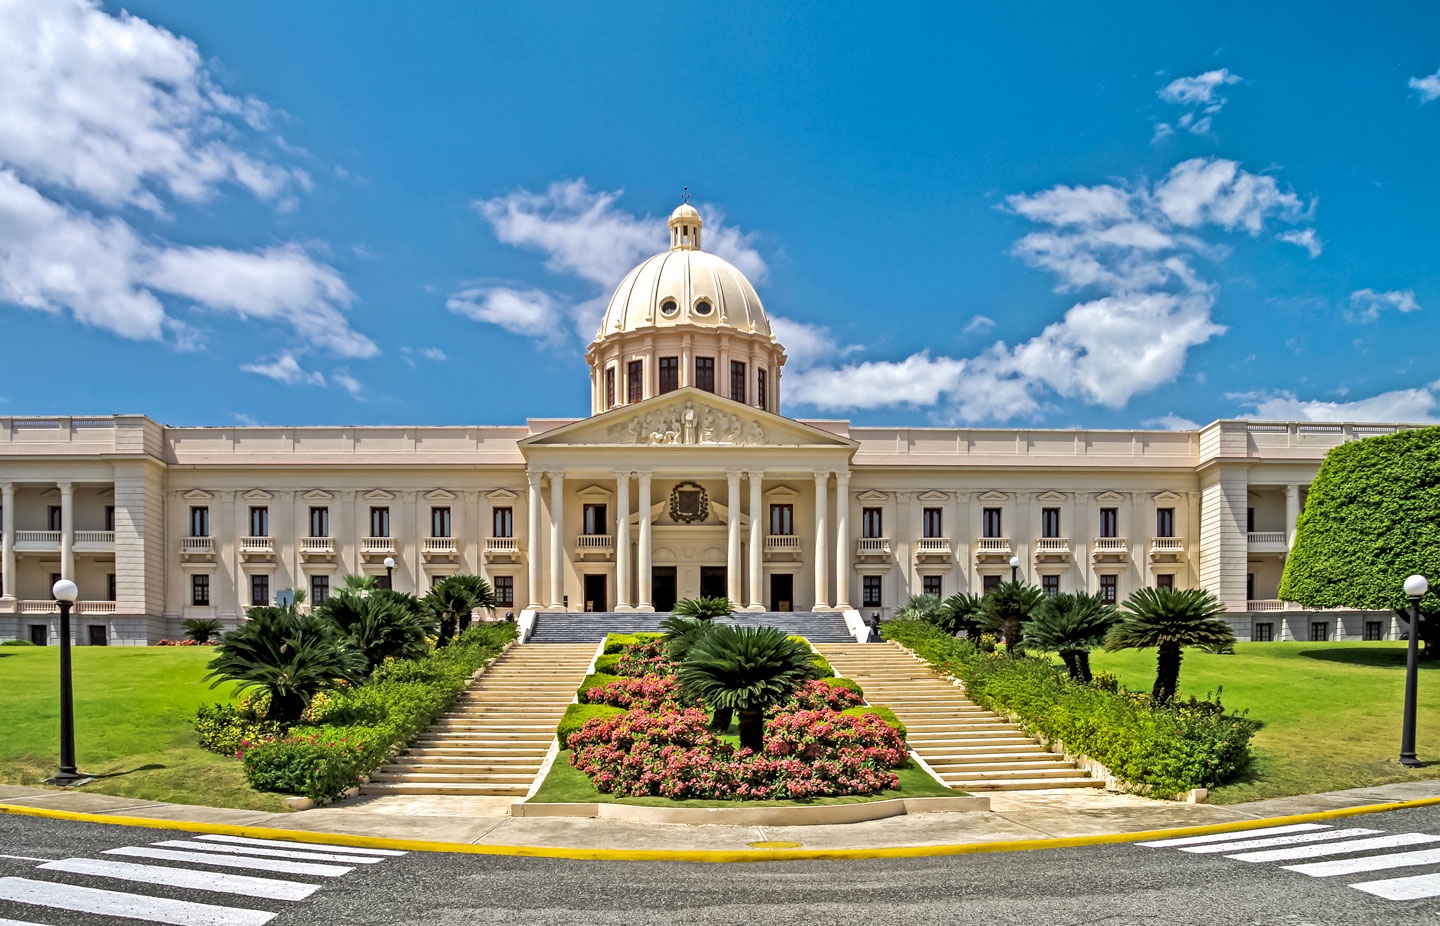 The Palacio Nacional houses the offices of the President and Vice President of the Dominican Republic.